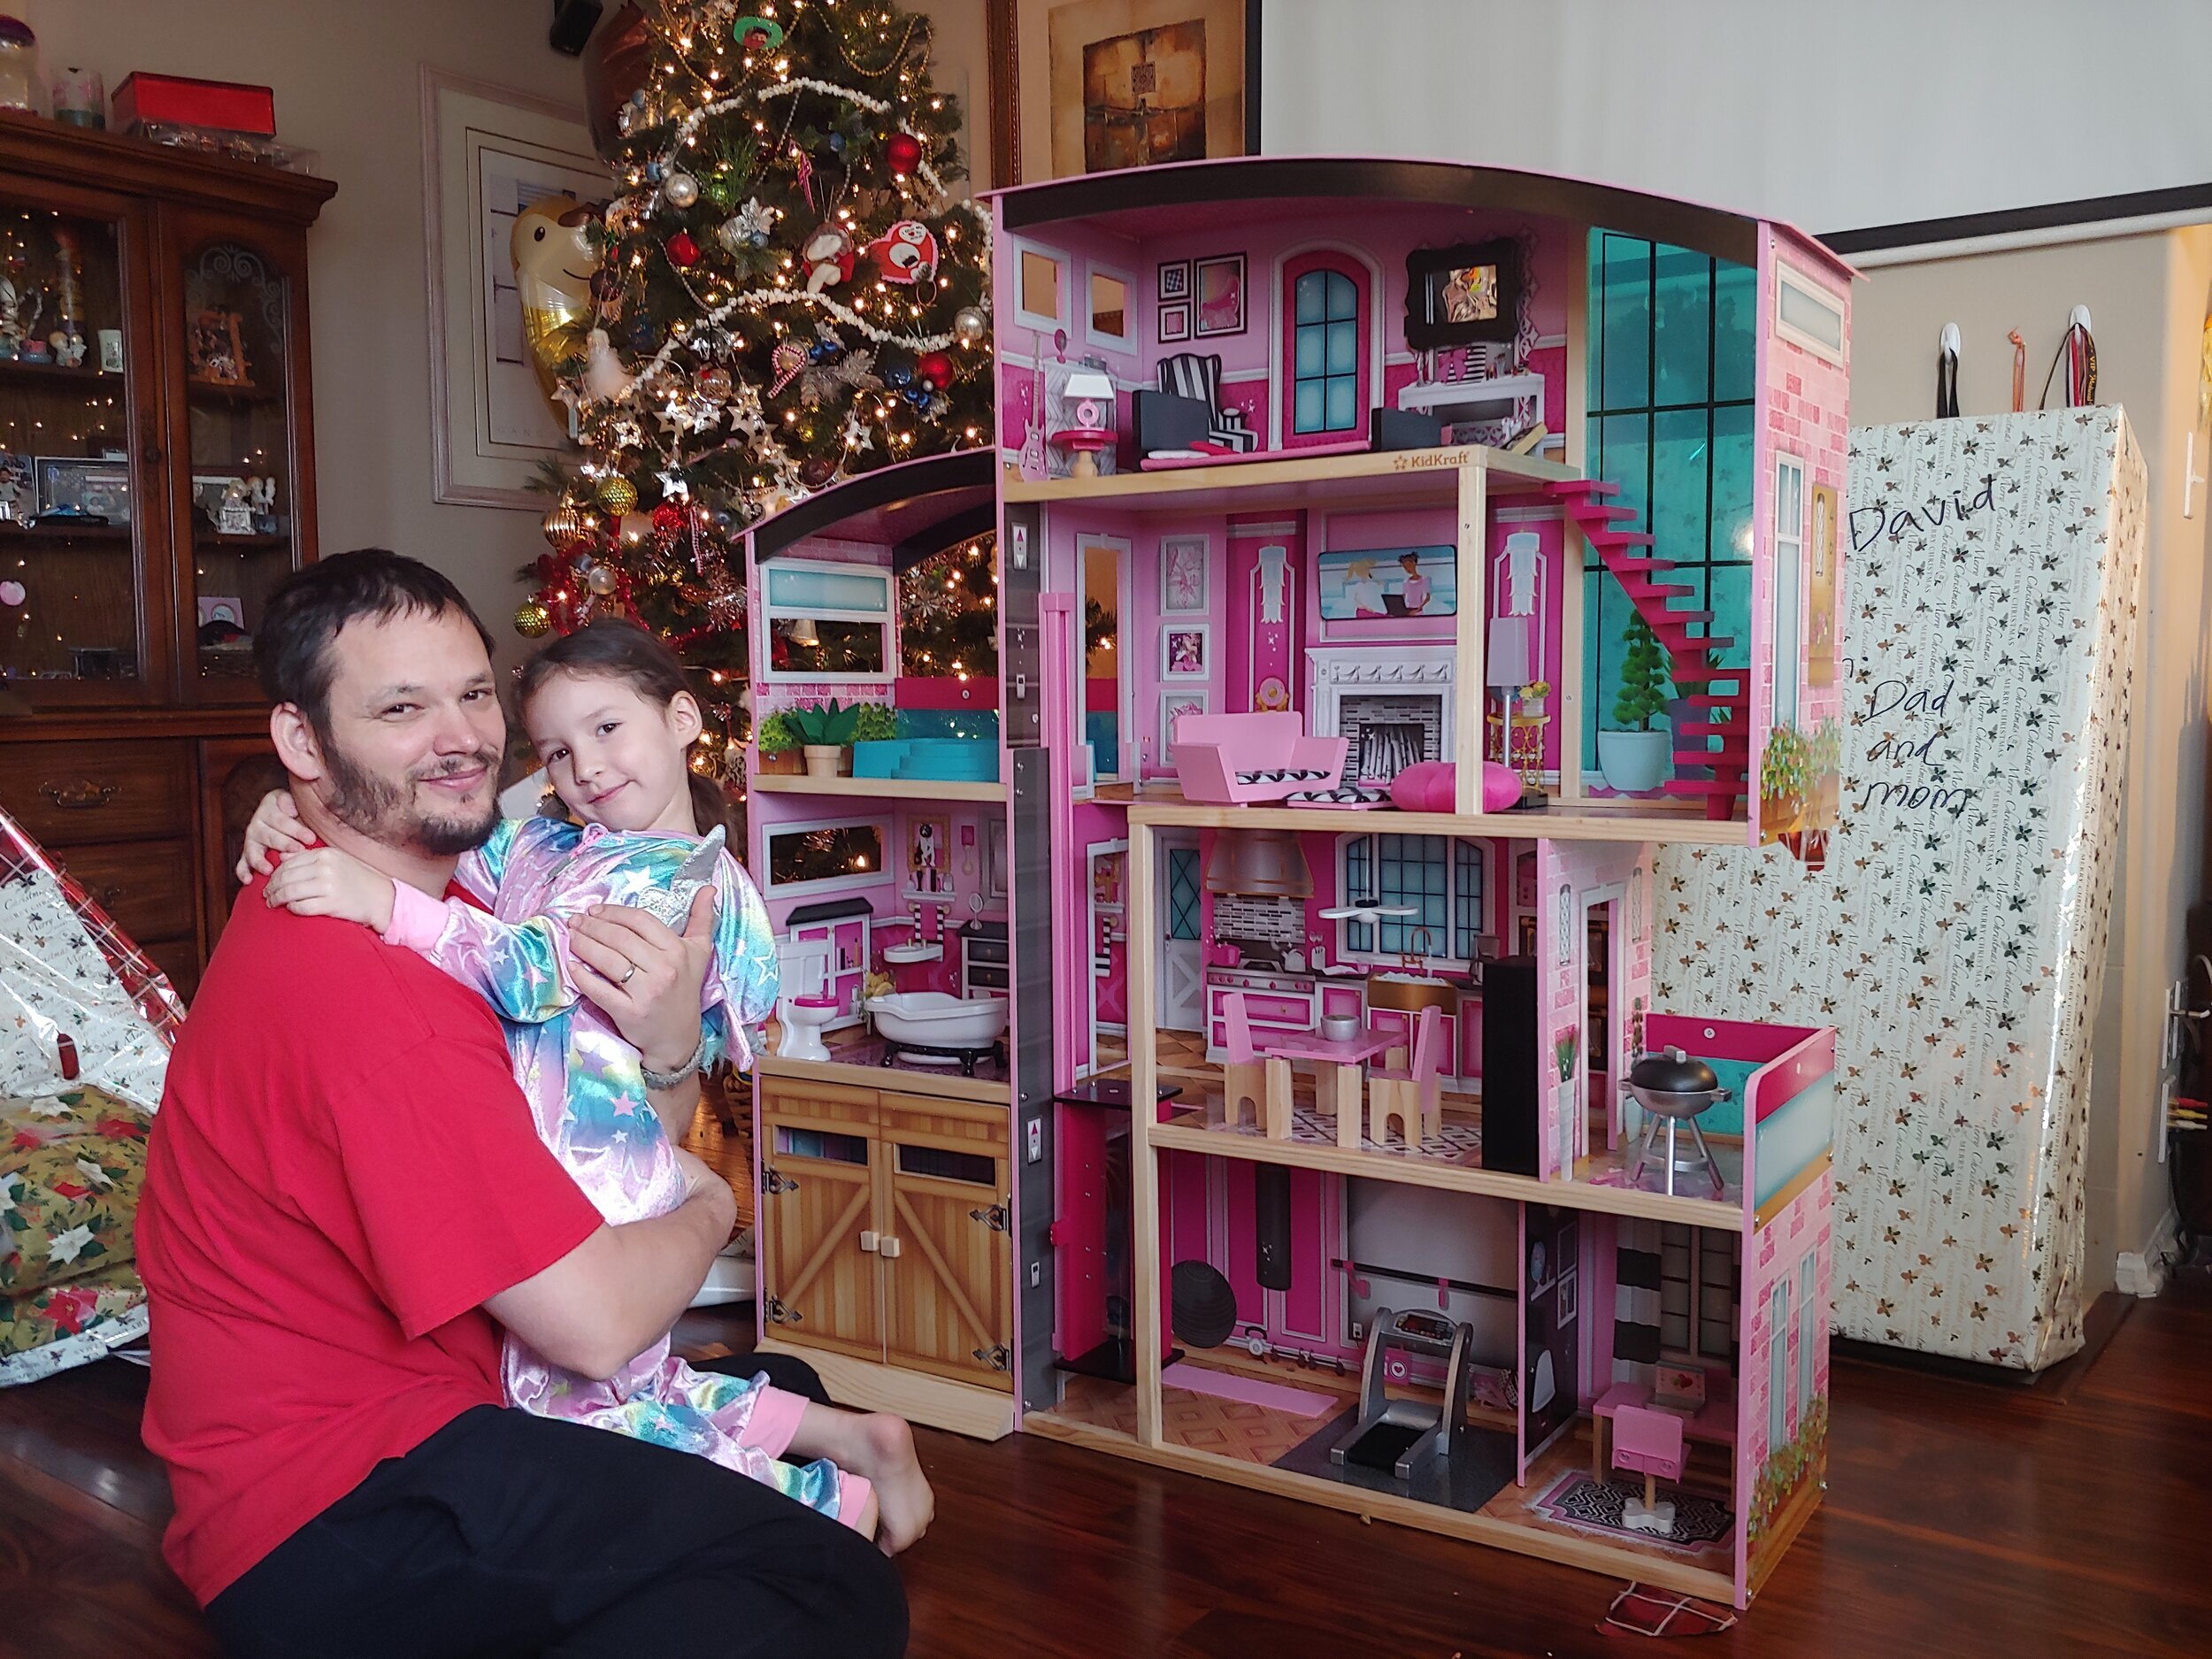 A dad hugging his daughter in front of the new doll house she just got as a present